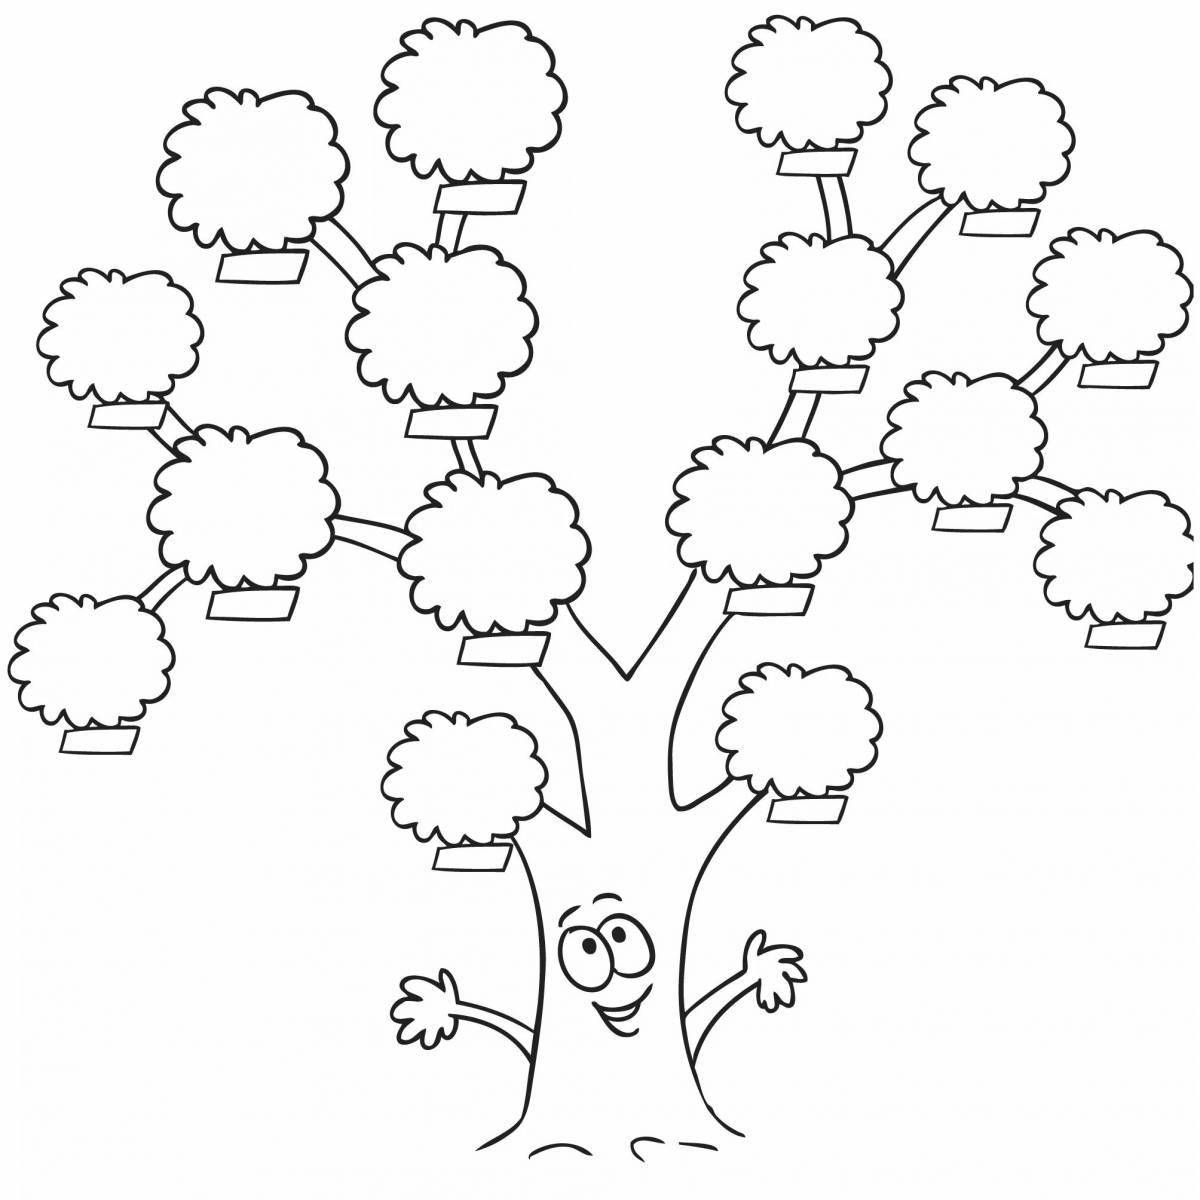 Coloring jovial family tree